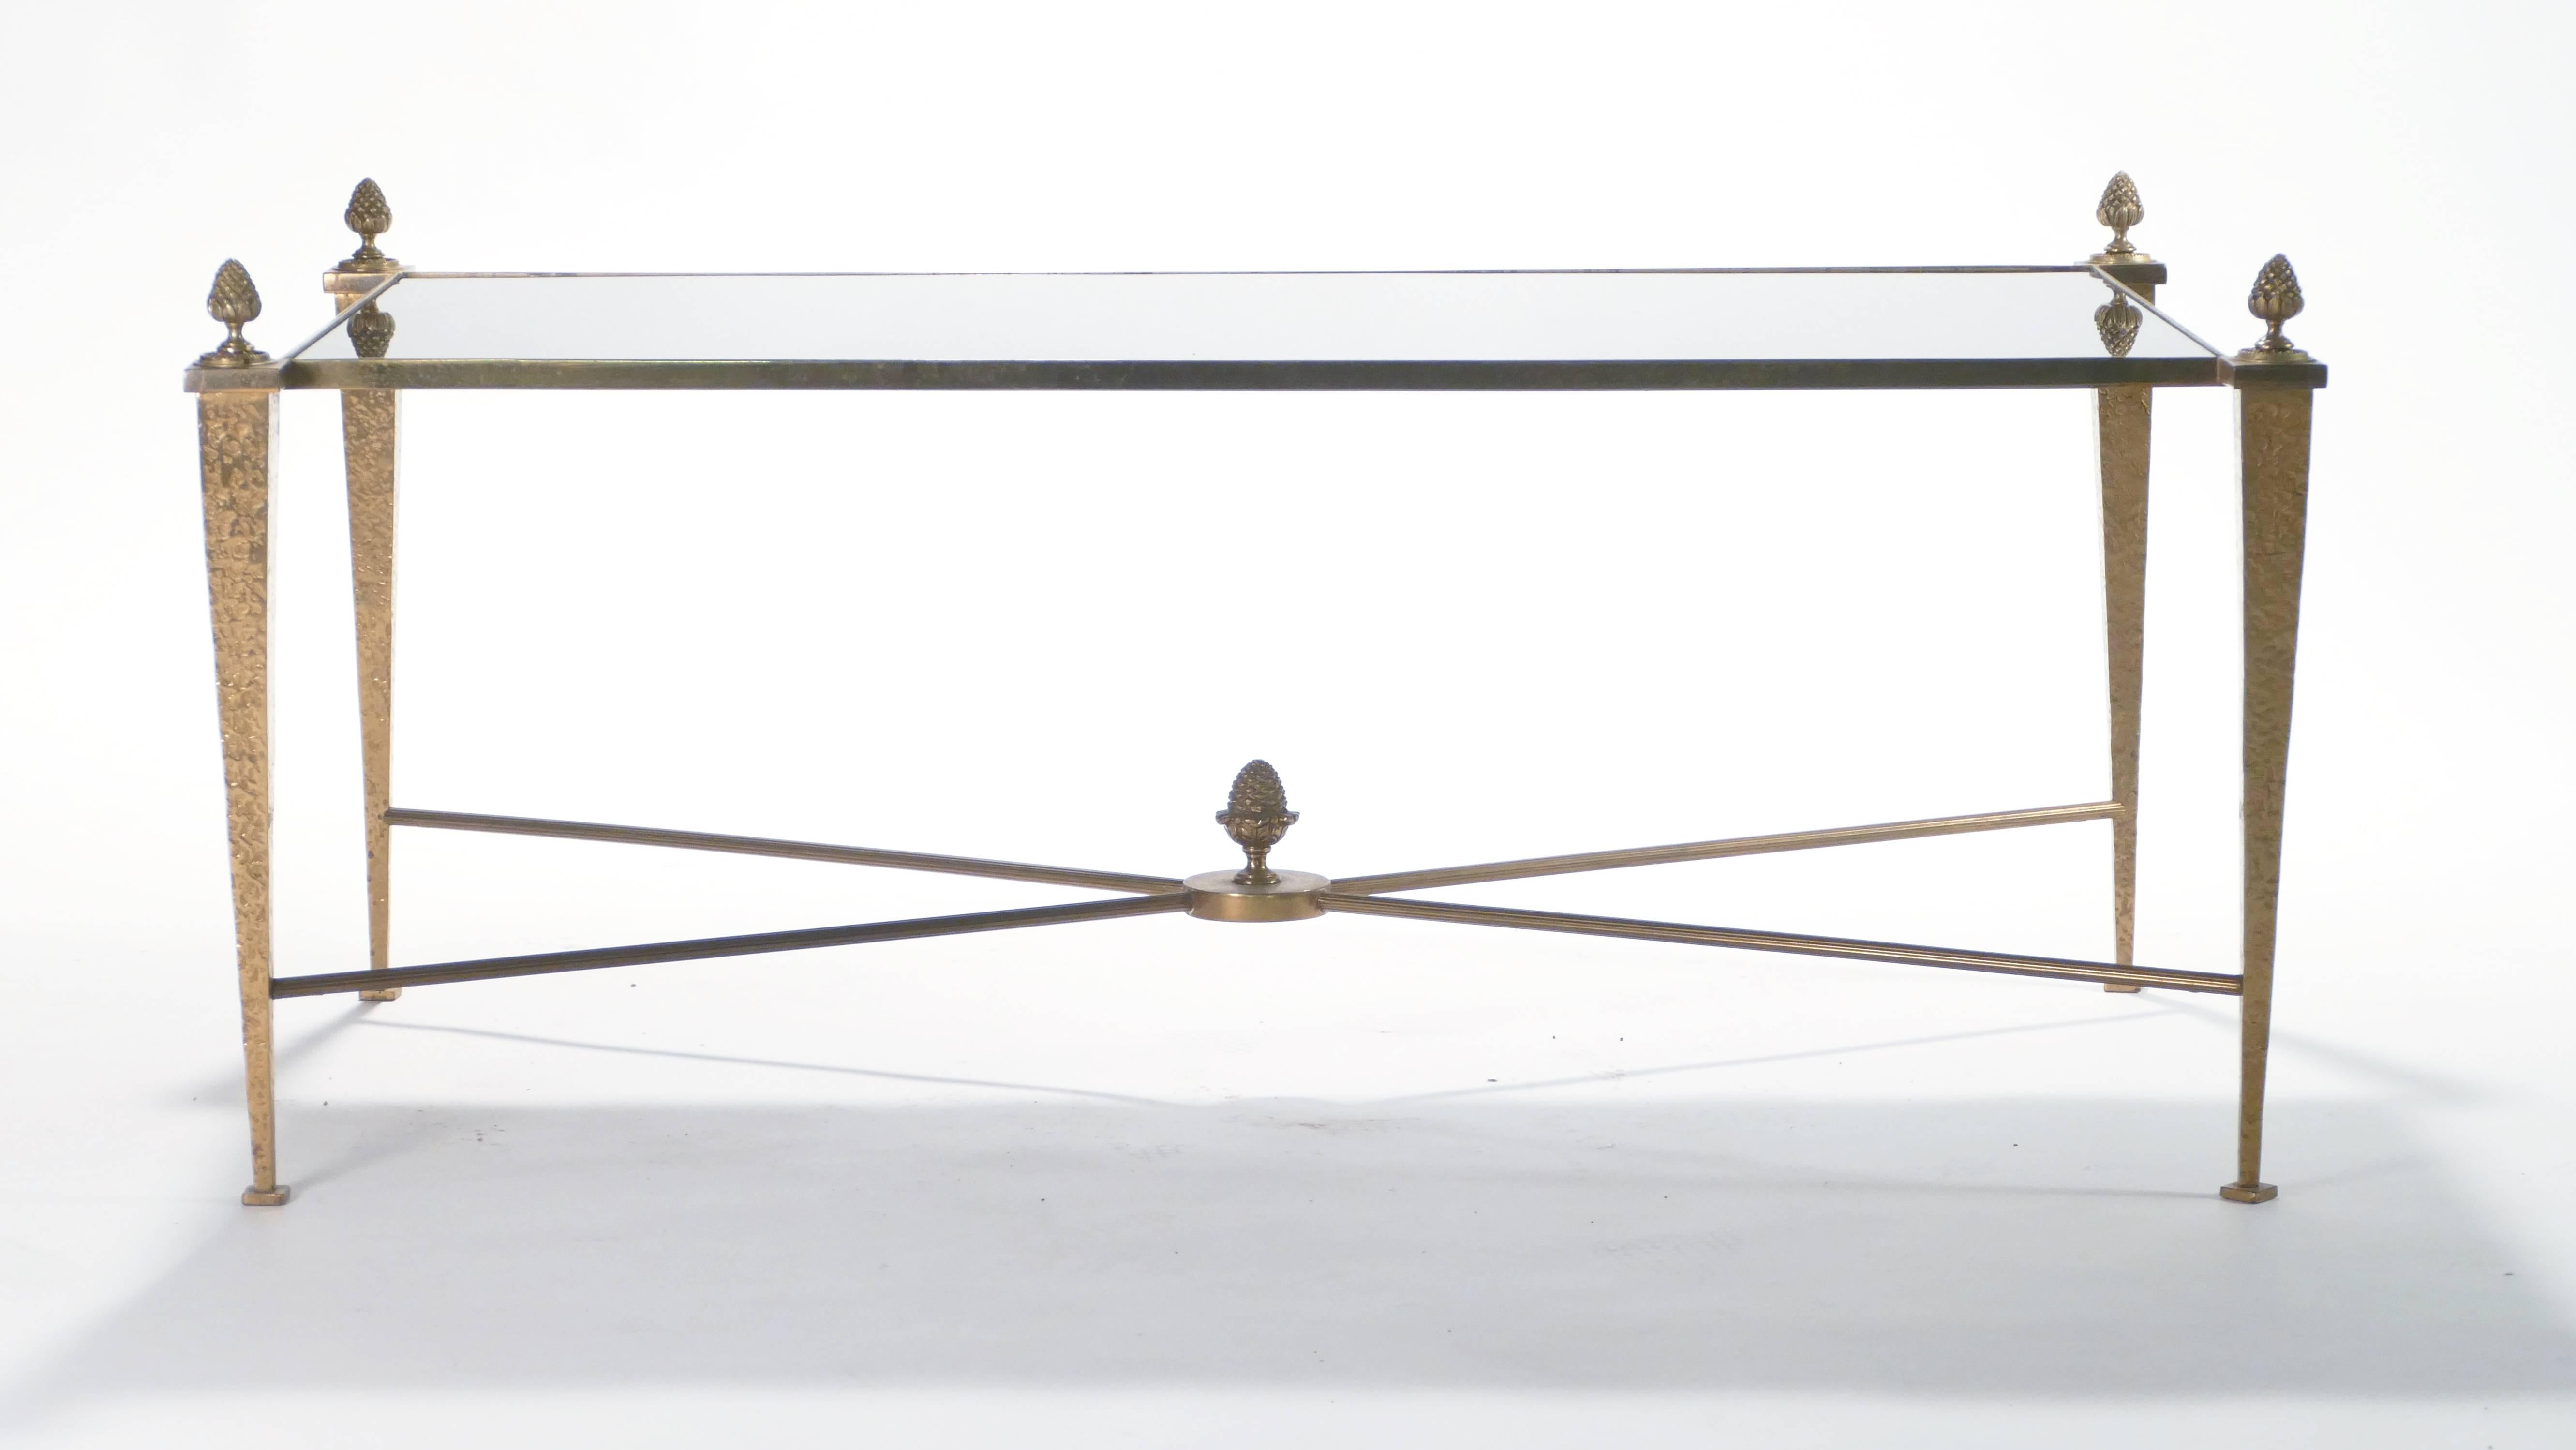 This coffee table by French design house Maison Ramsay was created with high-quality materials like sleek black opaline, gold gilt, and brass. The black opaline surface is impossibly smooth, while the gold gilt feet and brass pine cone details